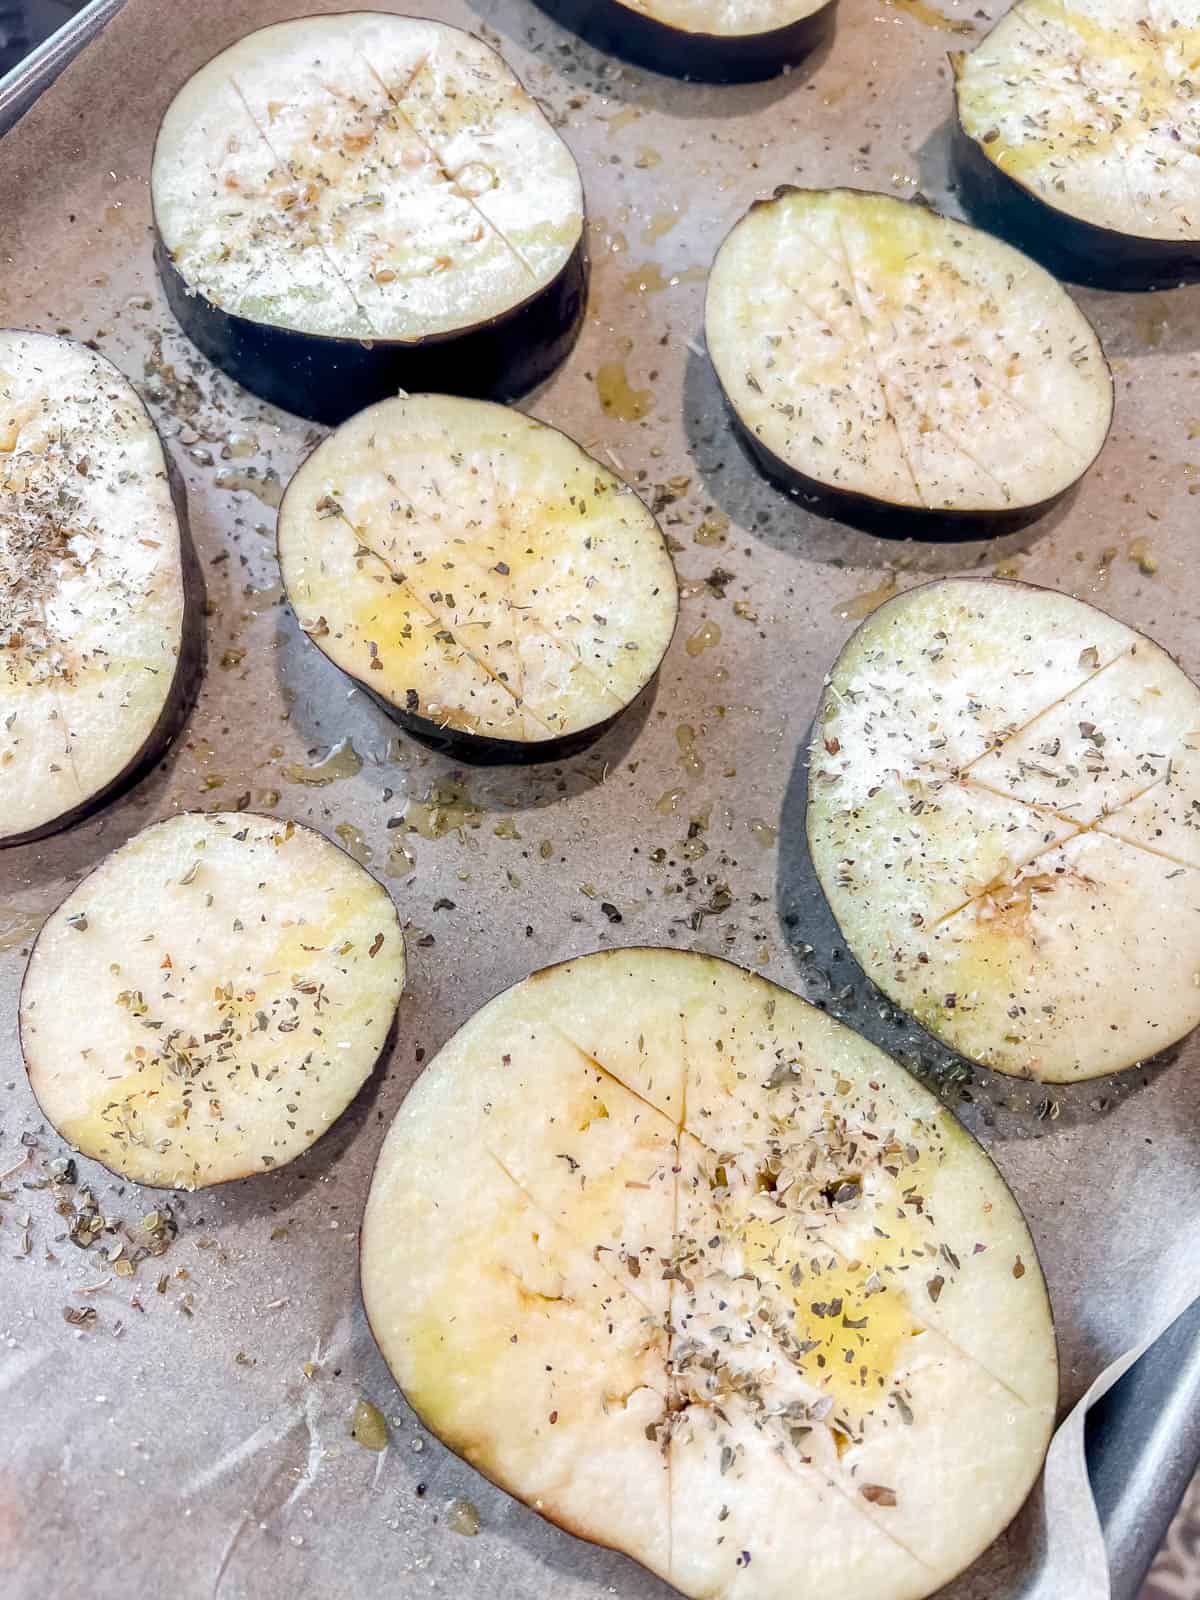 Eggplant with olive oil and spices on top before baking.